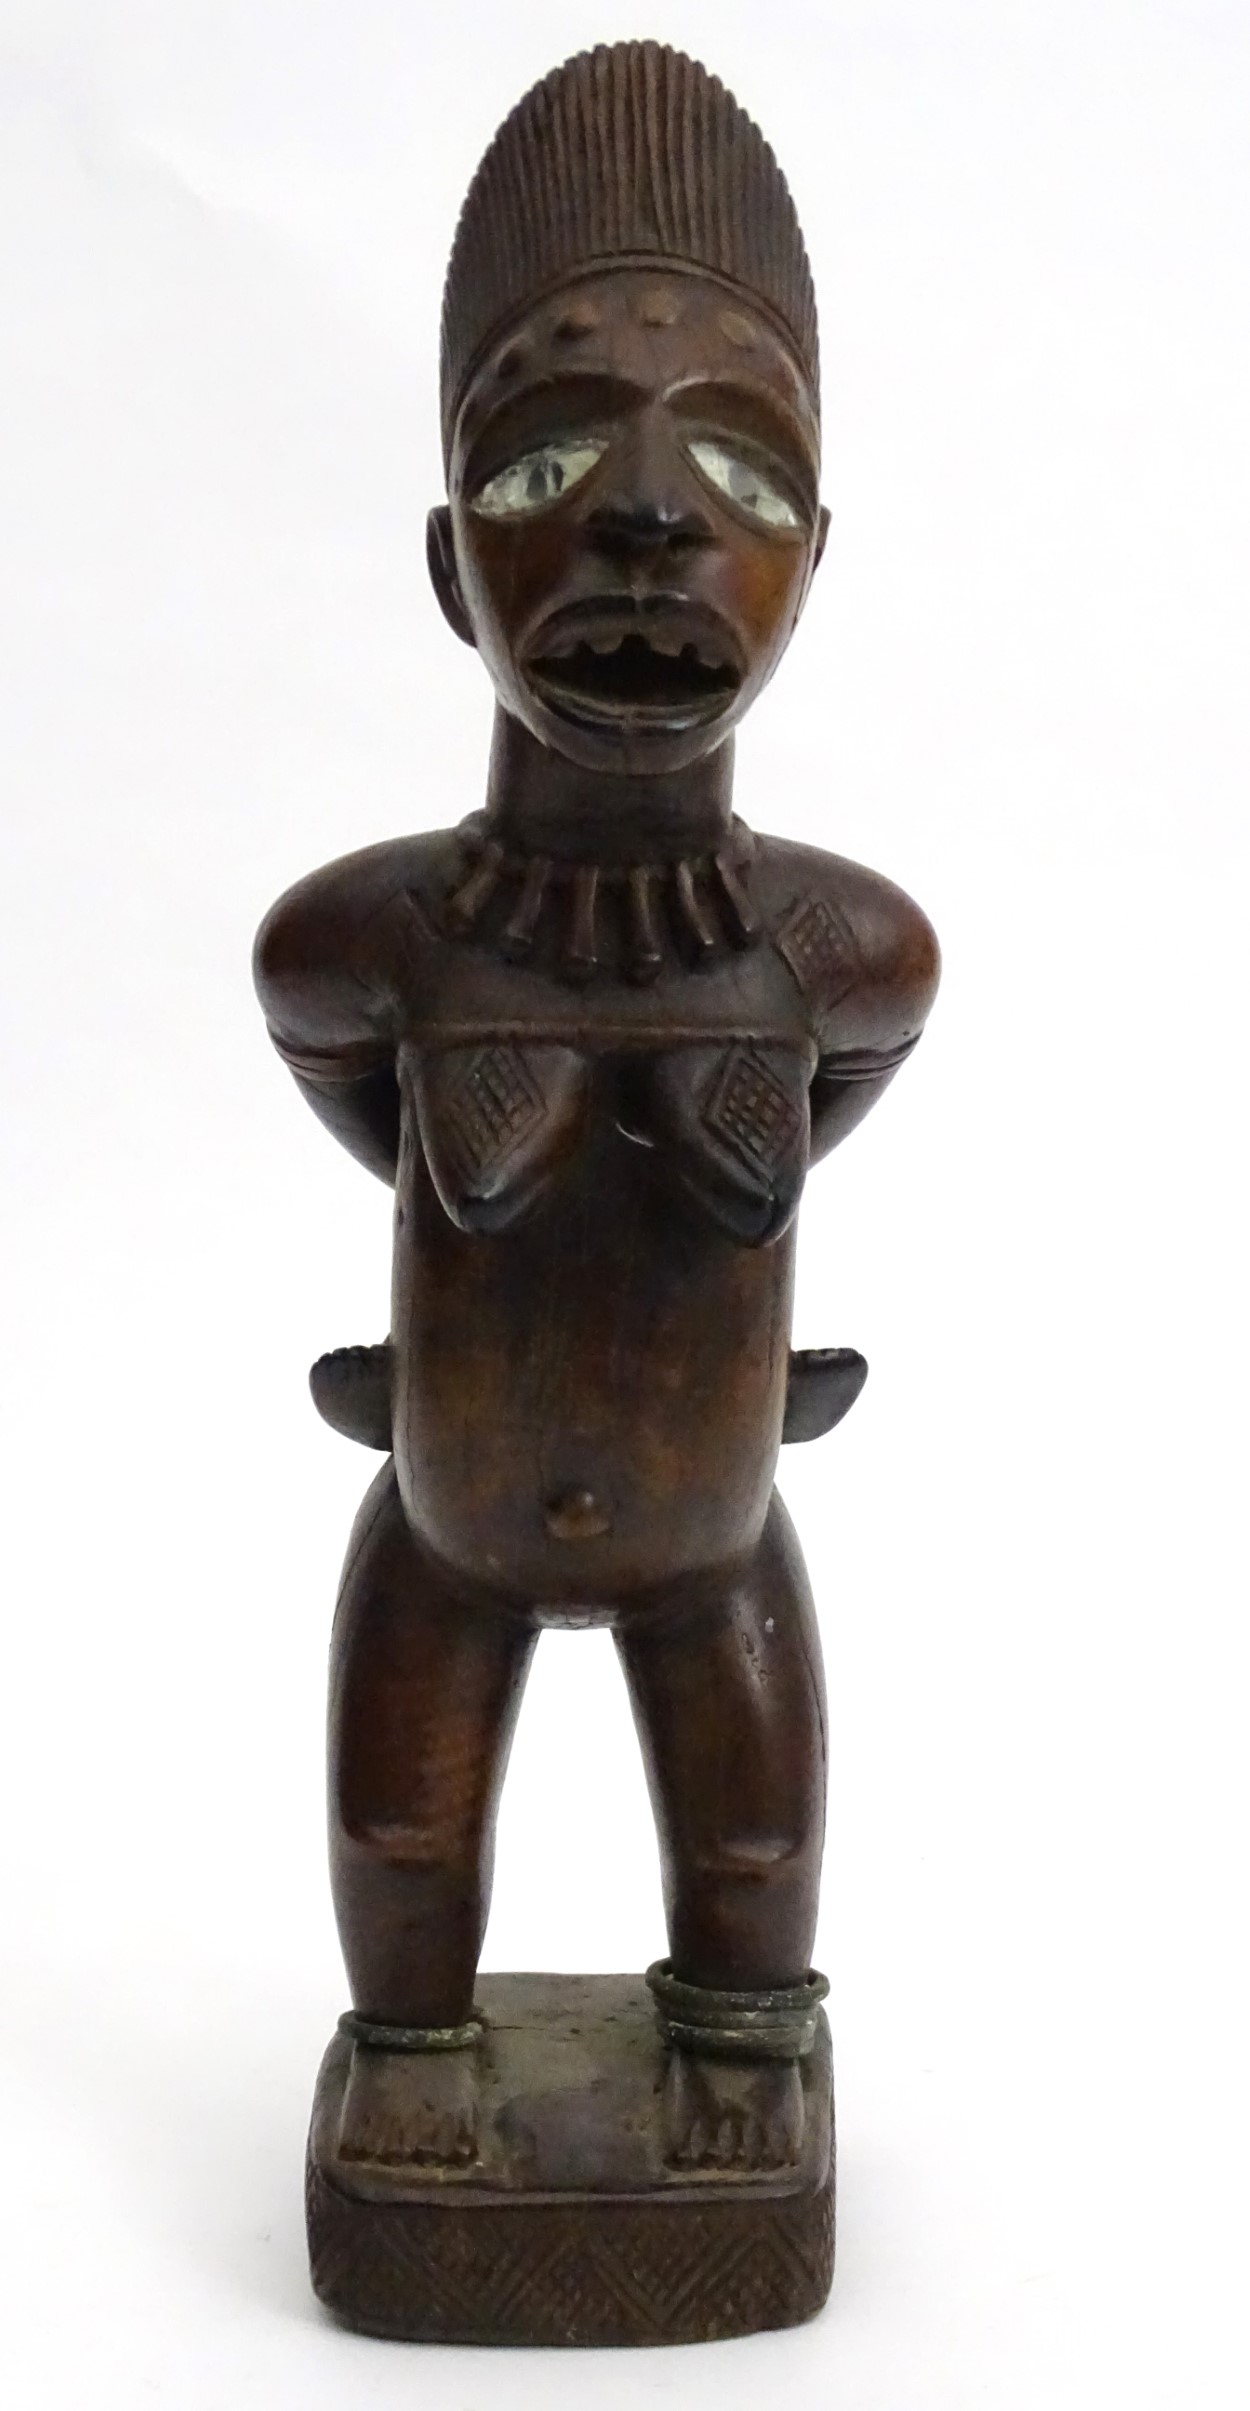 Tribal : An Ethnographic Native Tribal Kongo maternity figure. Approx. 18 1/2" high. - Image 4 of 11